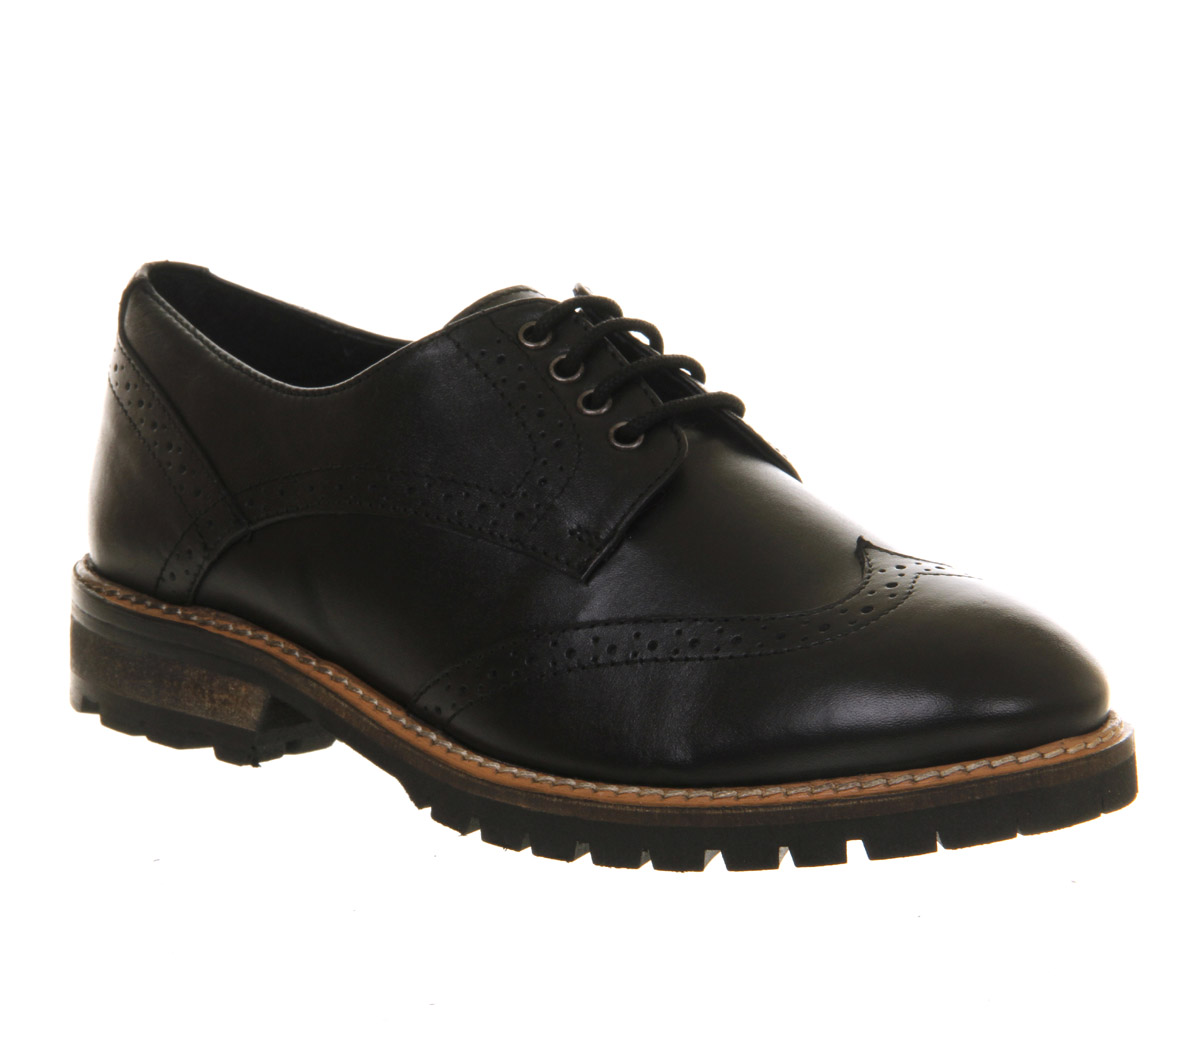 leather brogues womens uk